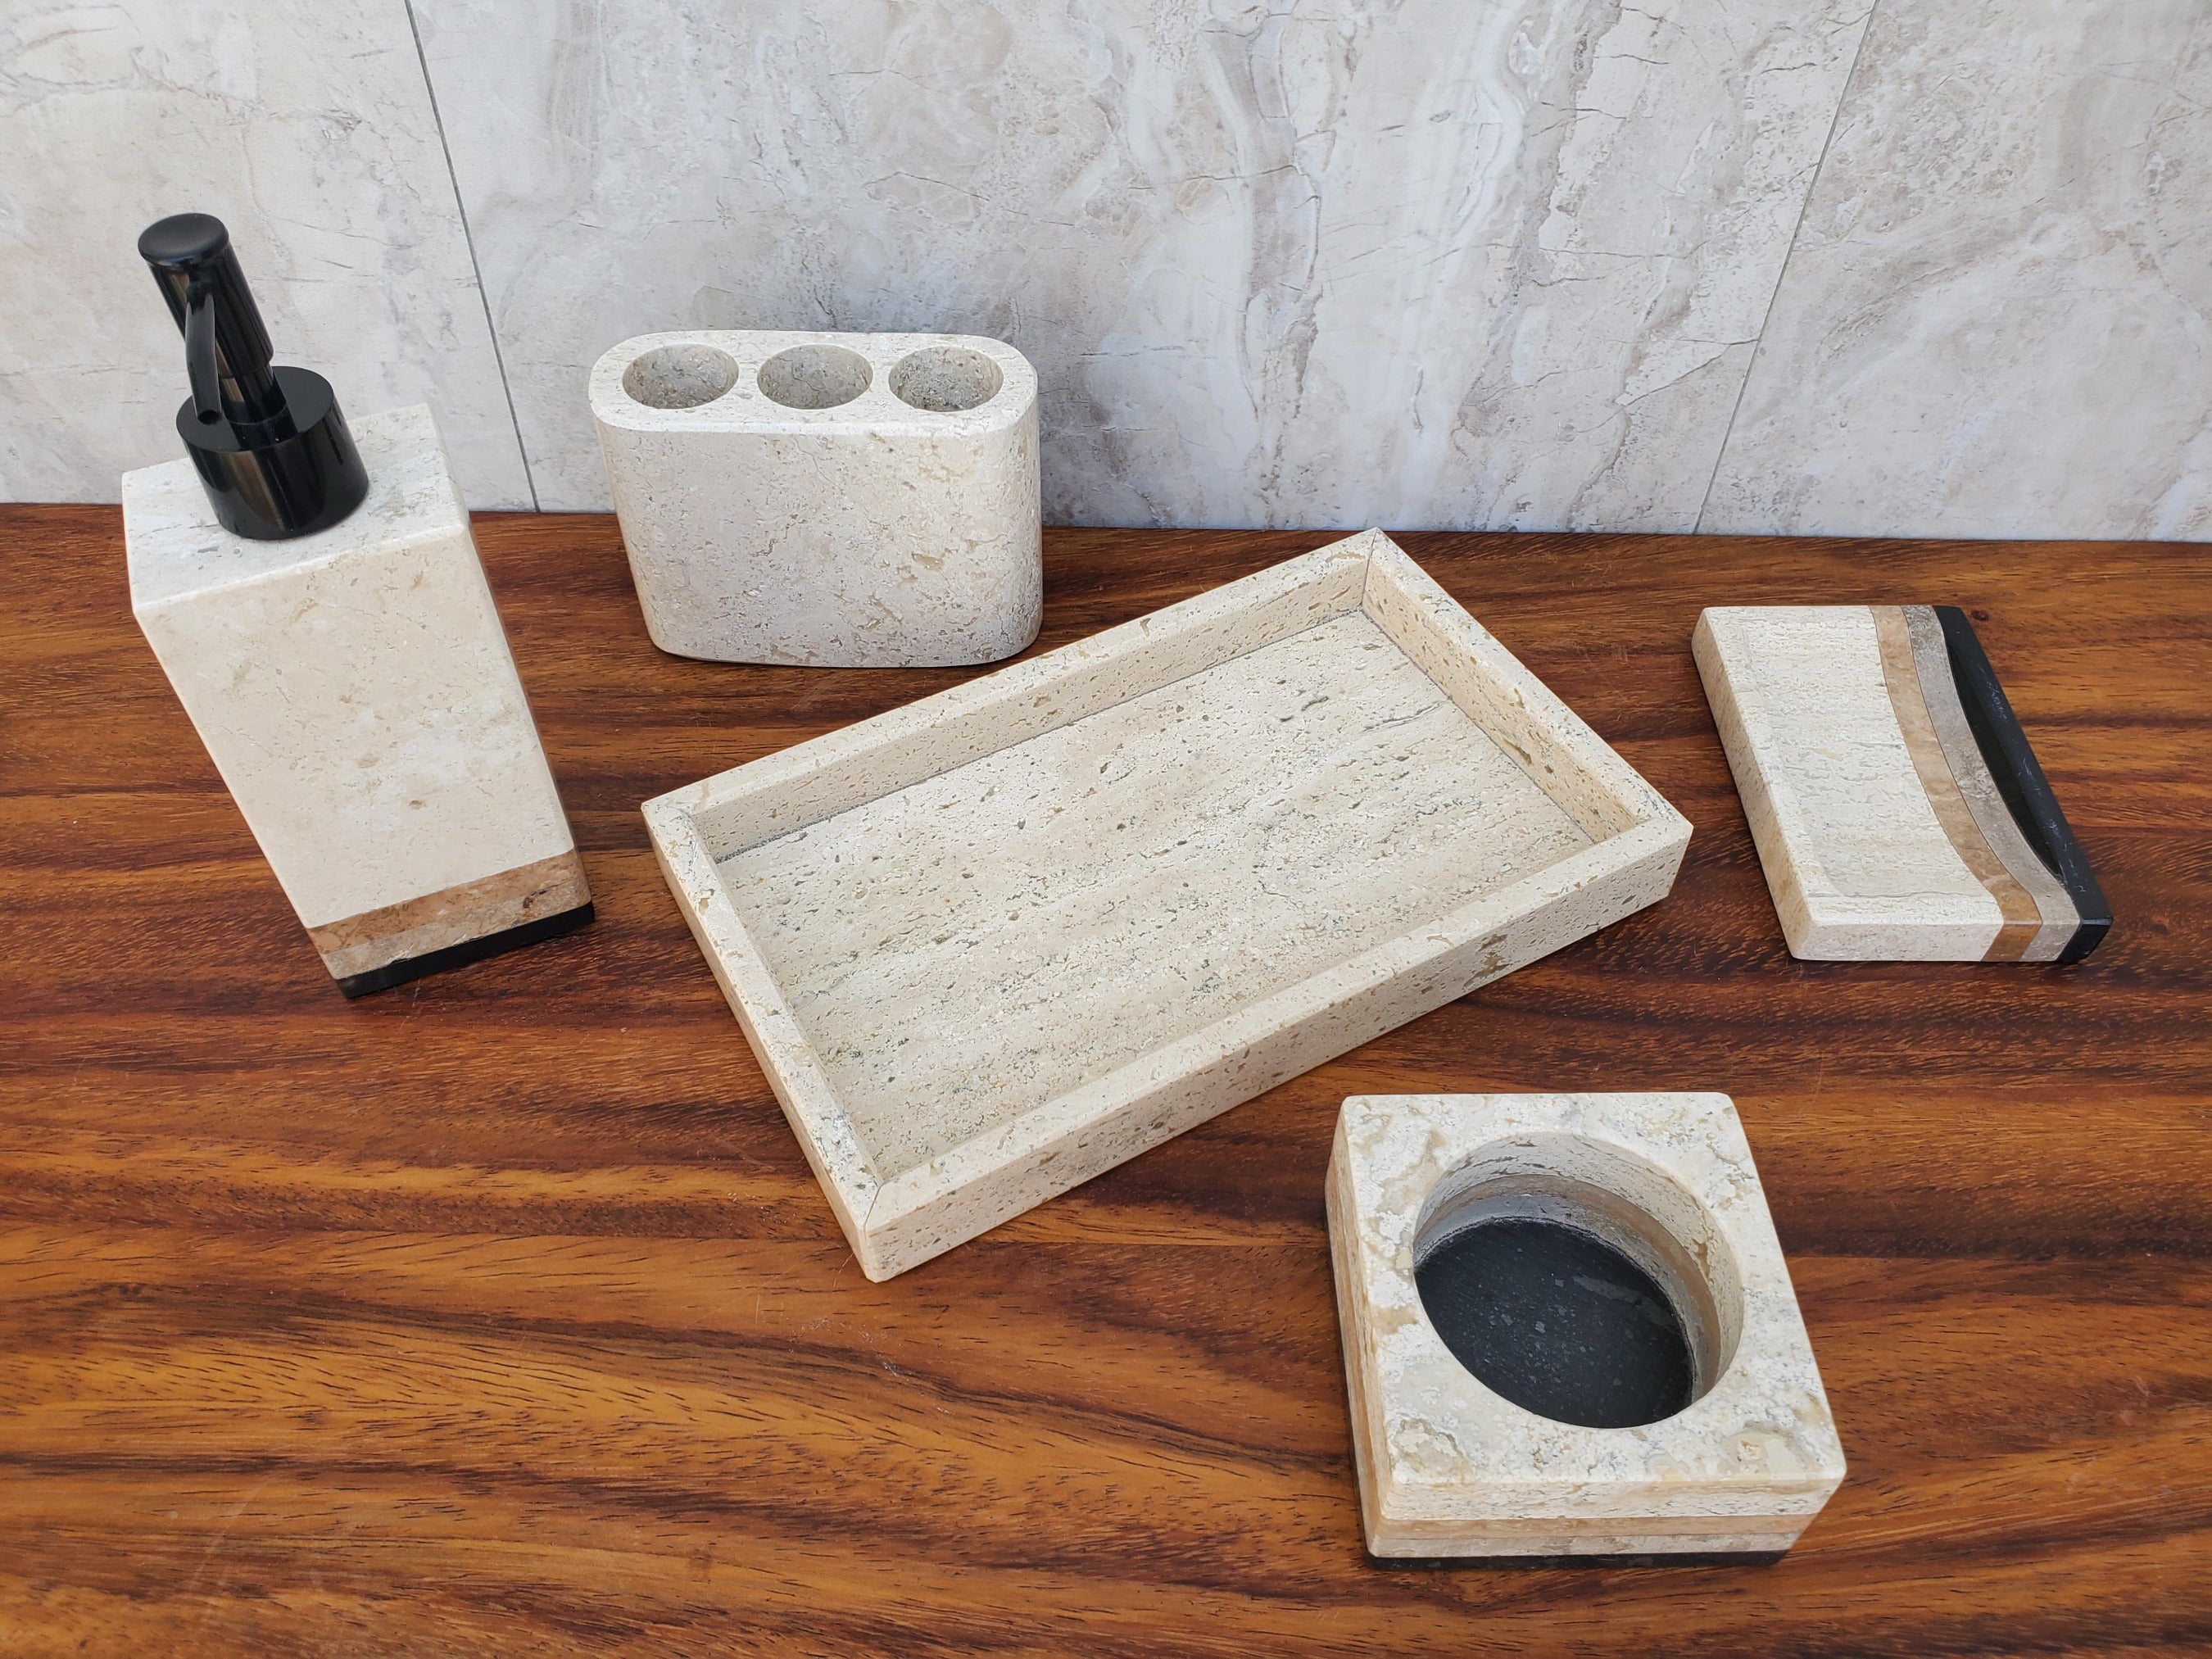 Gray, Brown, and Black Marble Stone Bathroom Accessory Set. Includes a lotion dispenser, a 3-slot toothbrush holder, a candle holder, a soap dish, and a tray. Handmade in Mexico. We package and ship from the USA. Buy now at www.felipeandgrace.com.